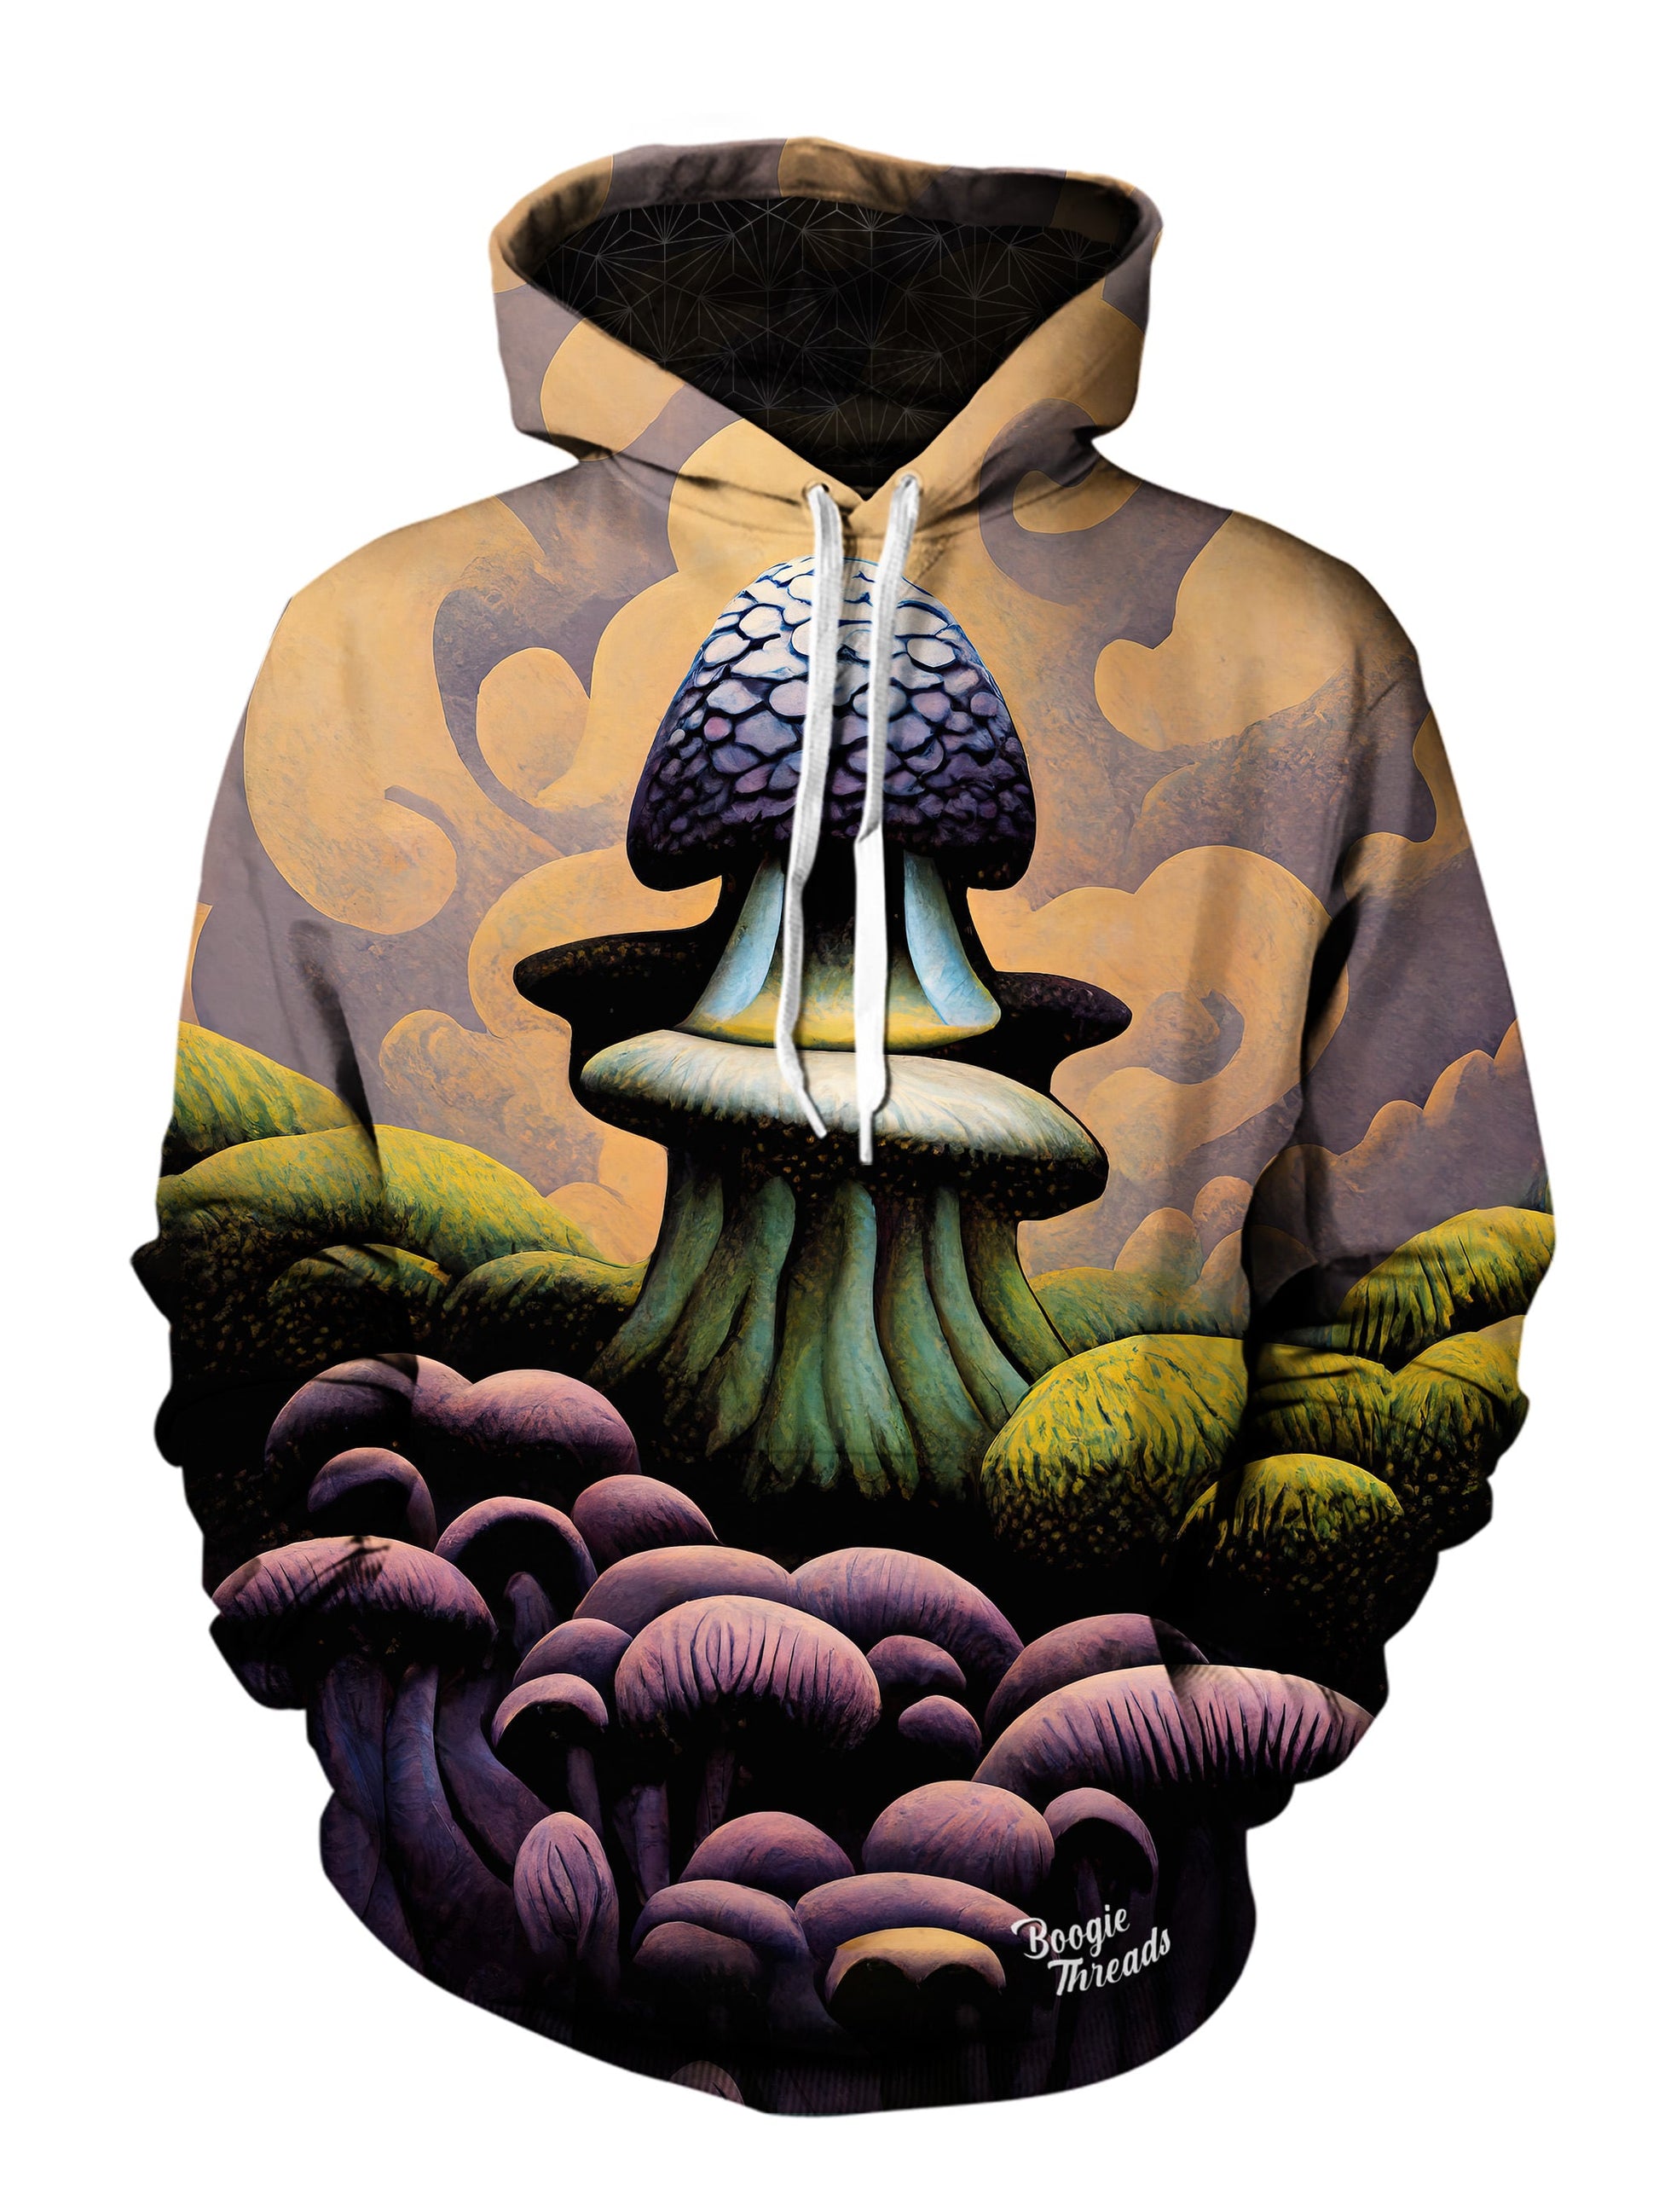 Release Of Surprise Unisex Pullover Hoodie - EDM Festival Clothing - Boogie Threads